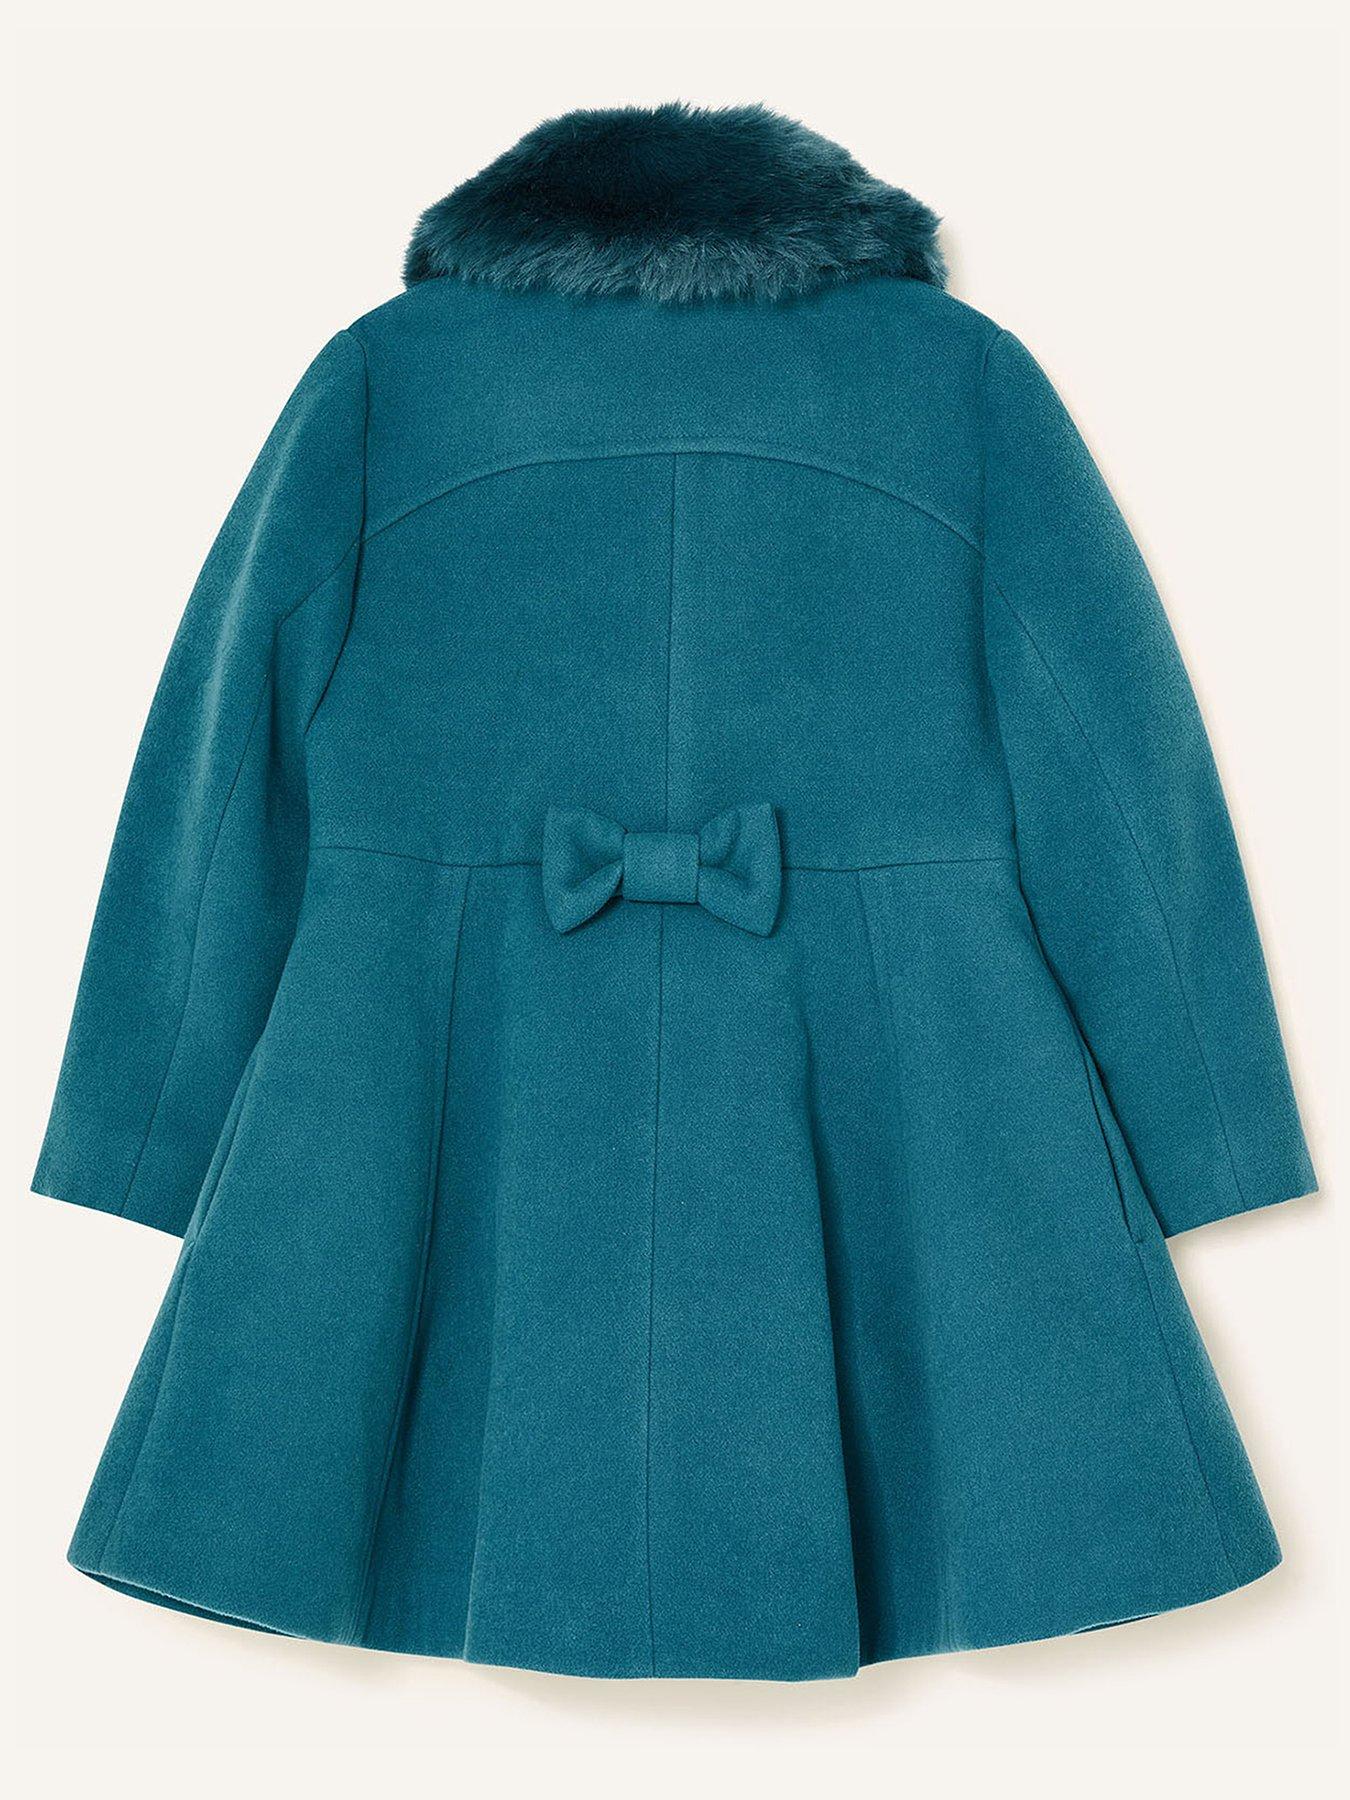 Girls Clothes Girls Seam Detail Skirted Coat - Teal